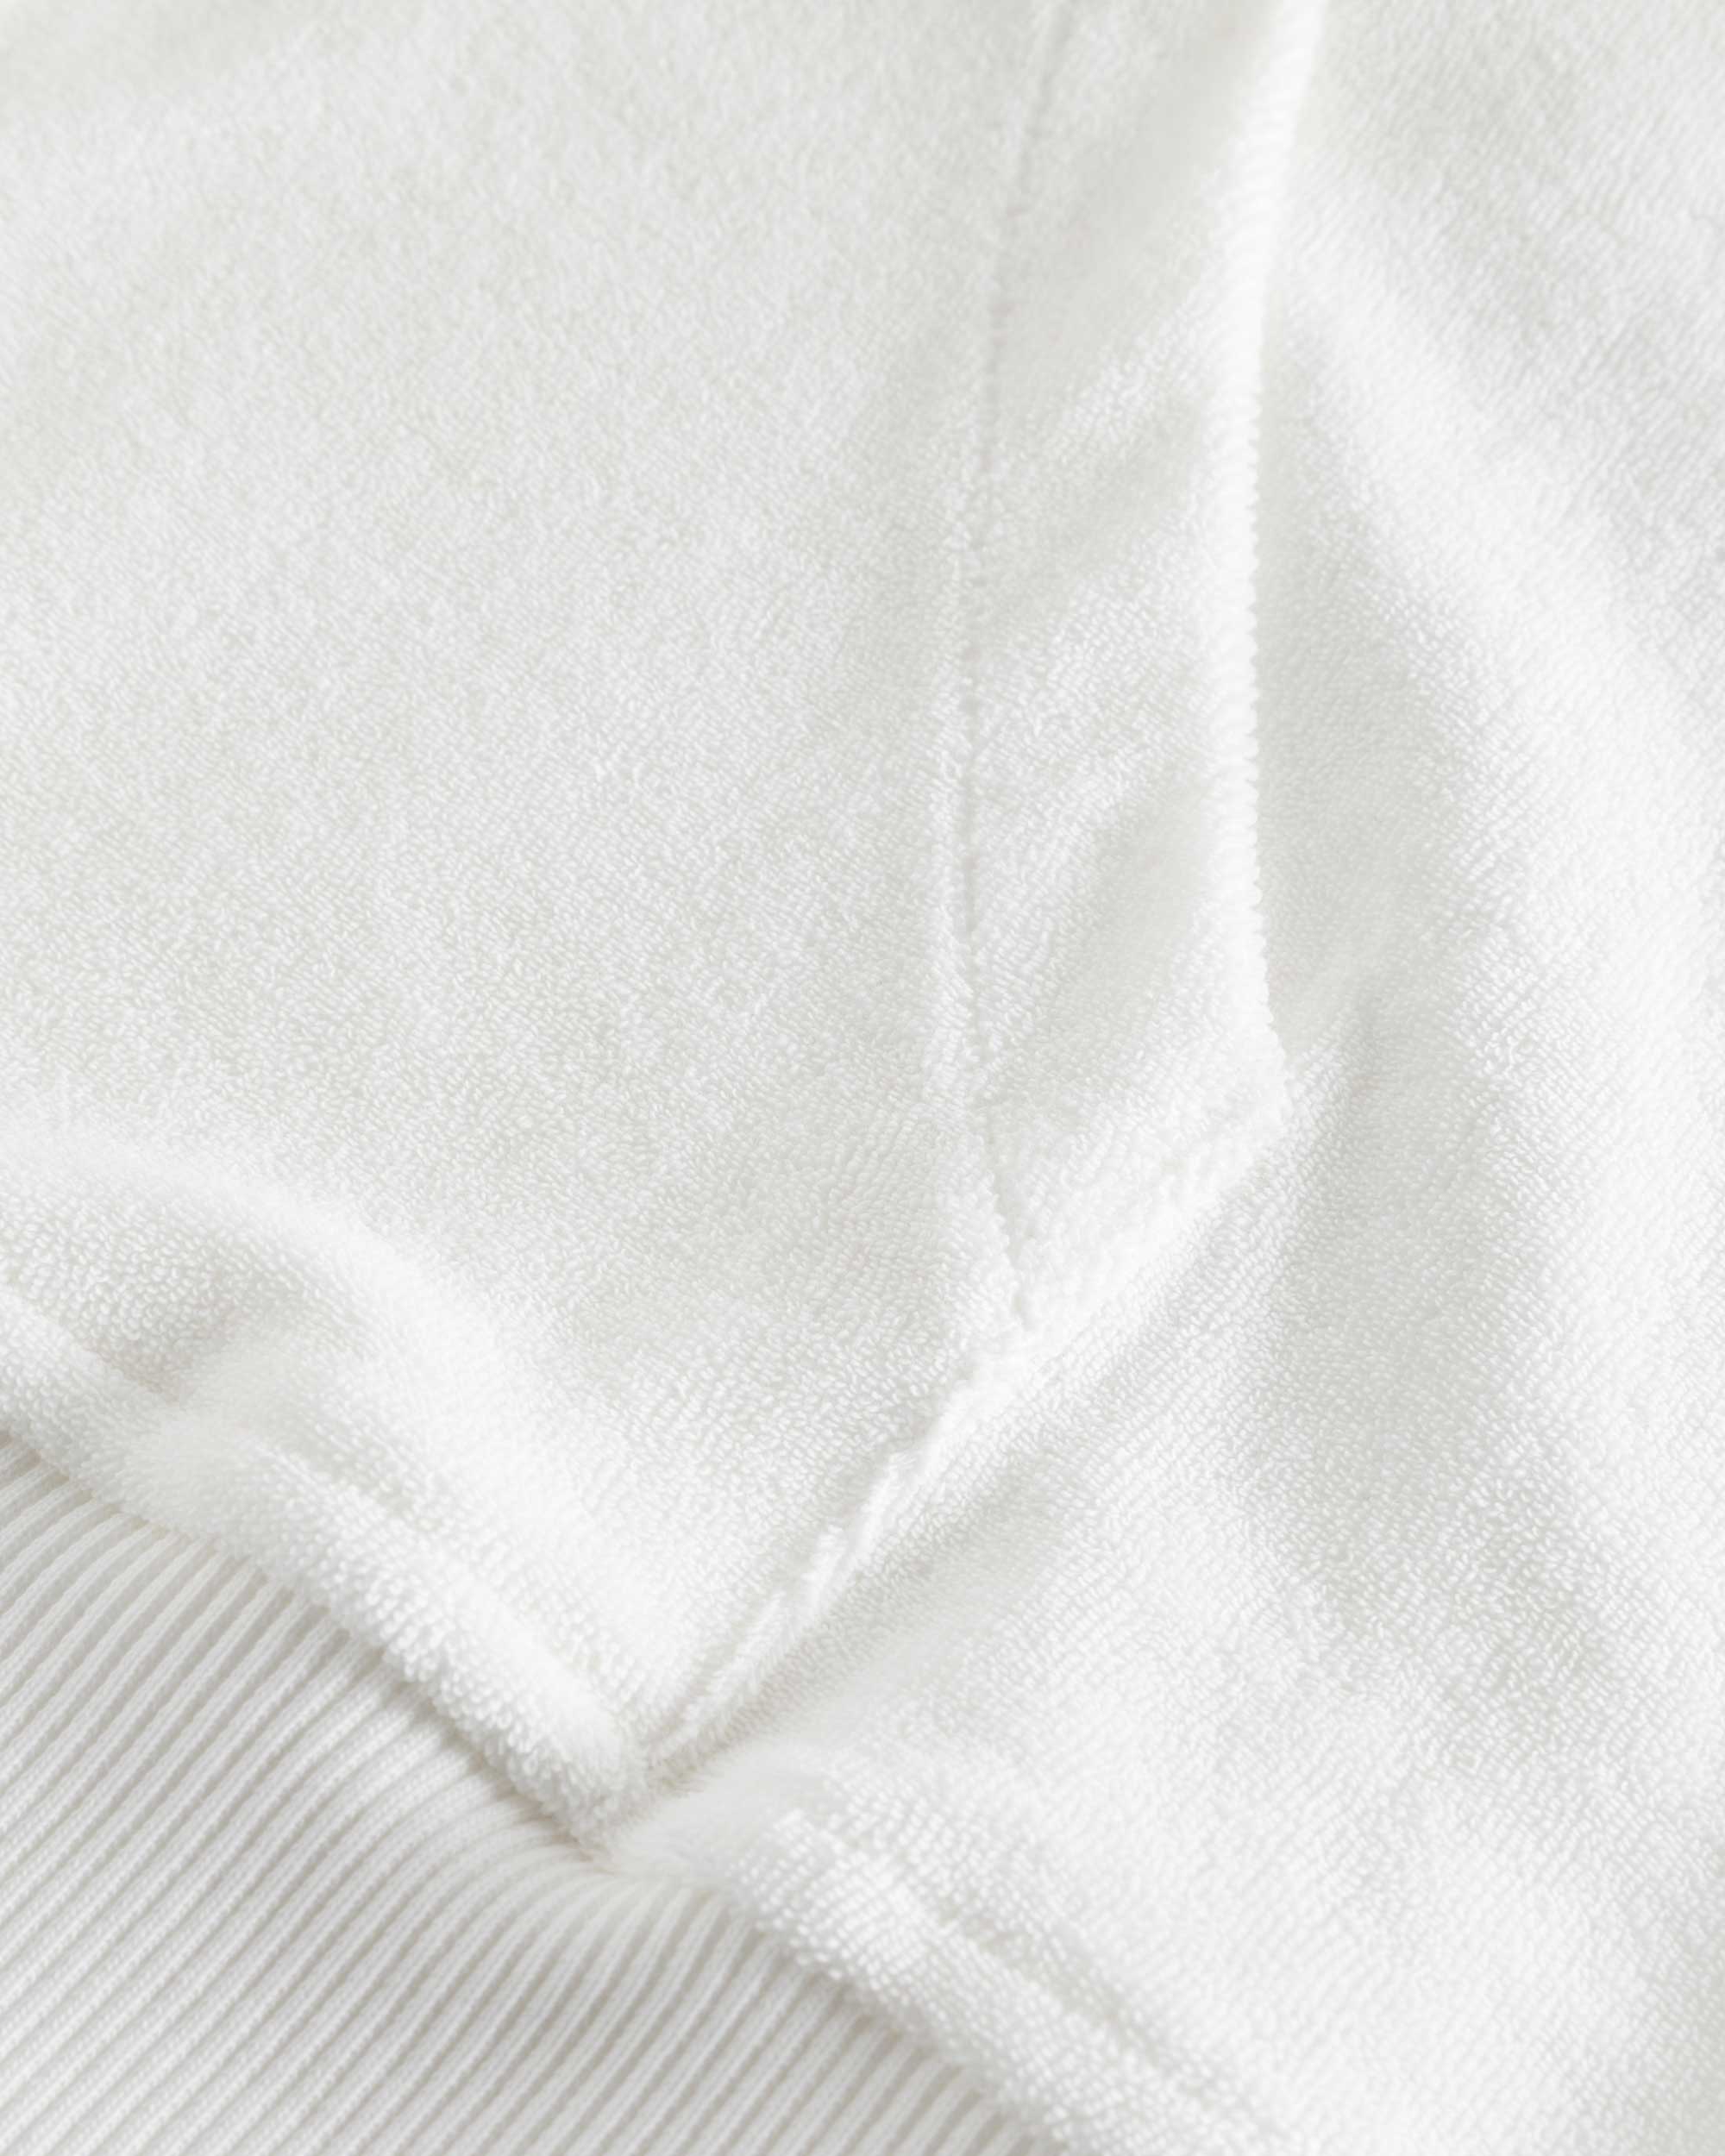 Close up of stitchings on a white hoodie